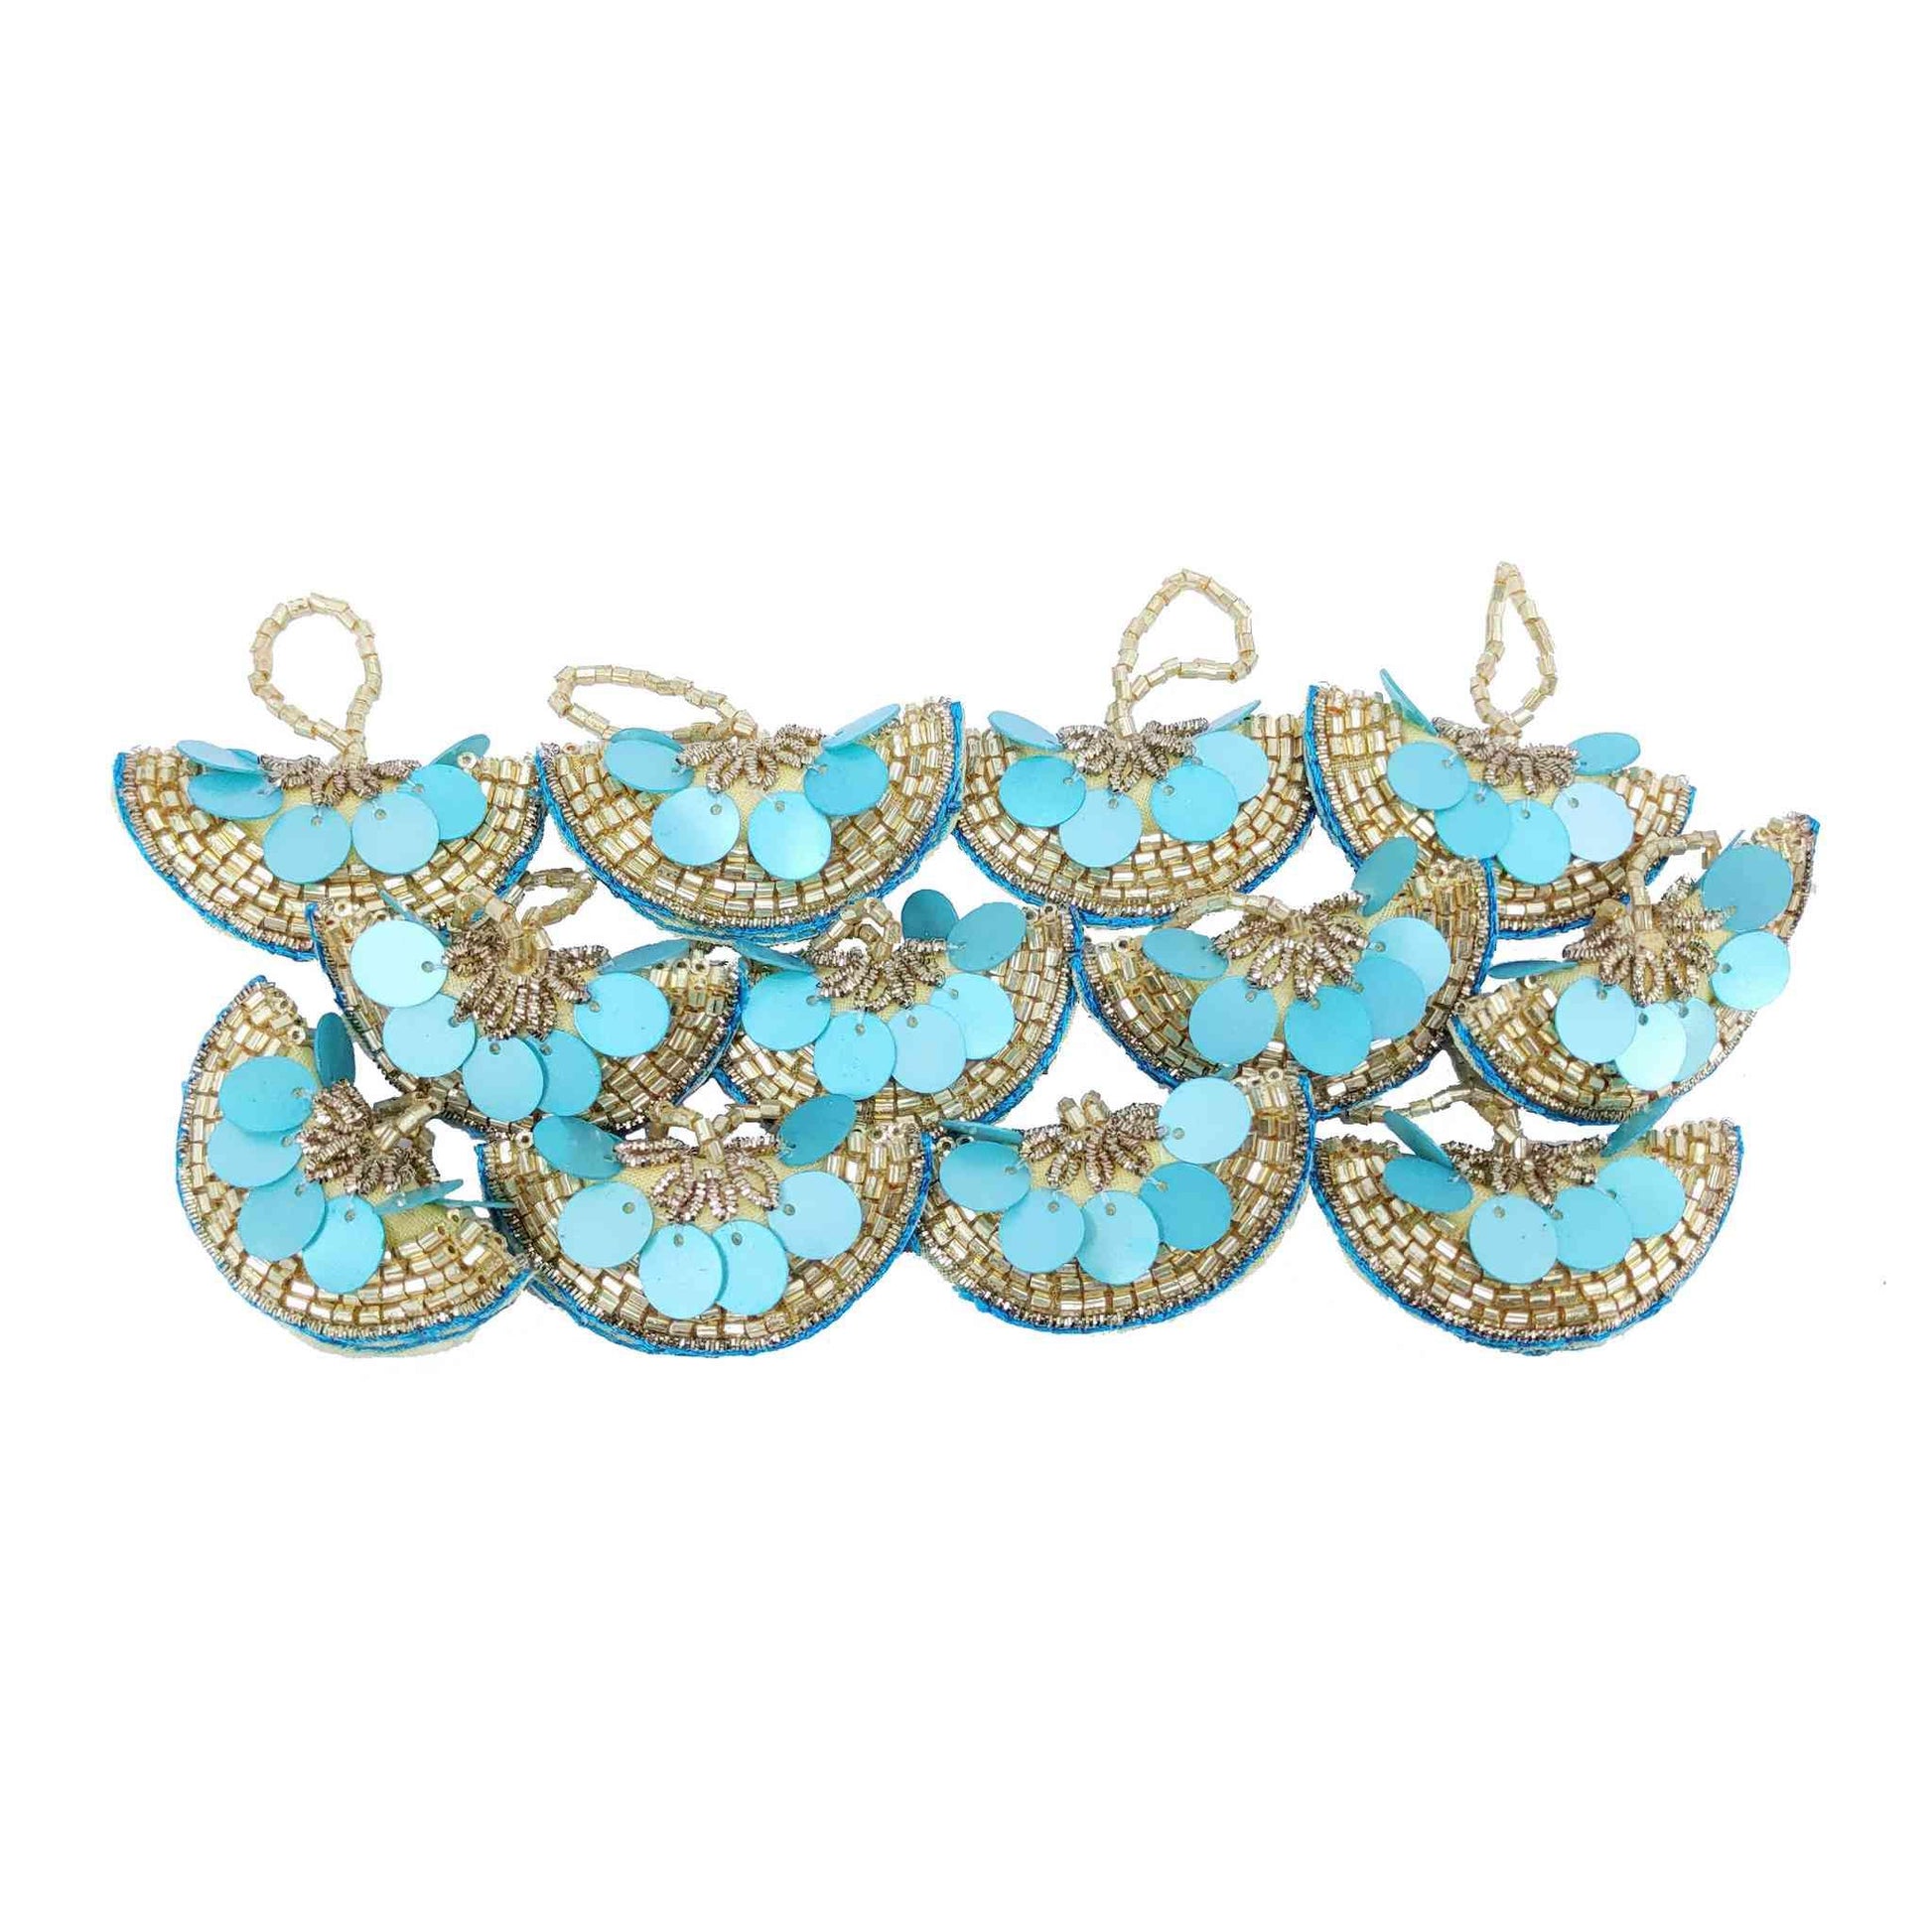 Designer Sequence Latkan Buti for DIY Craft, Trouseau Packing or Decoration (Bunch of 12) - Design 201, Turquoise - Indian Petals